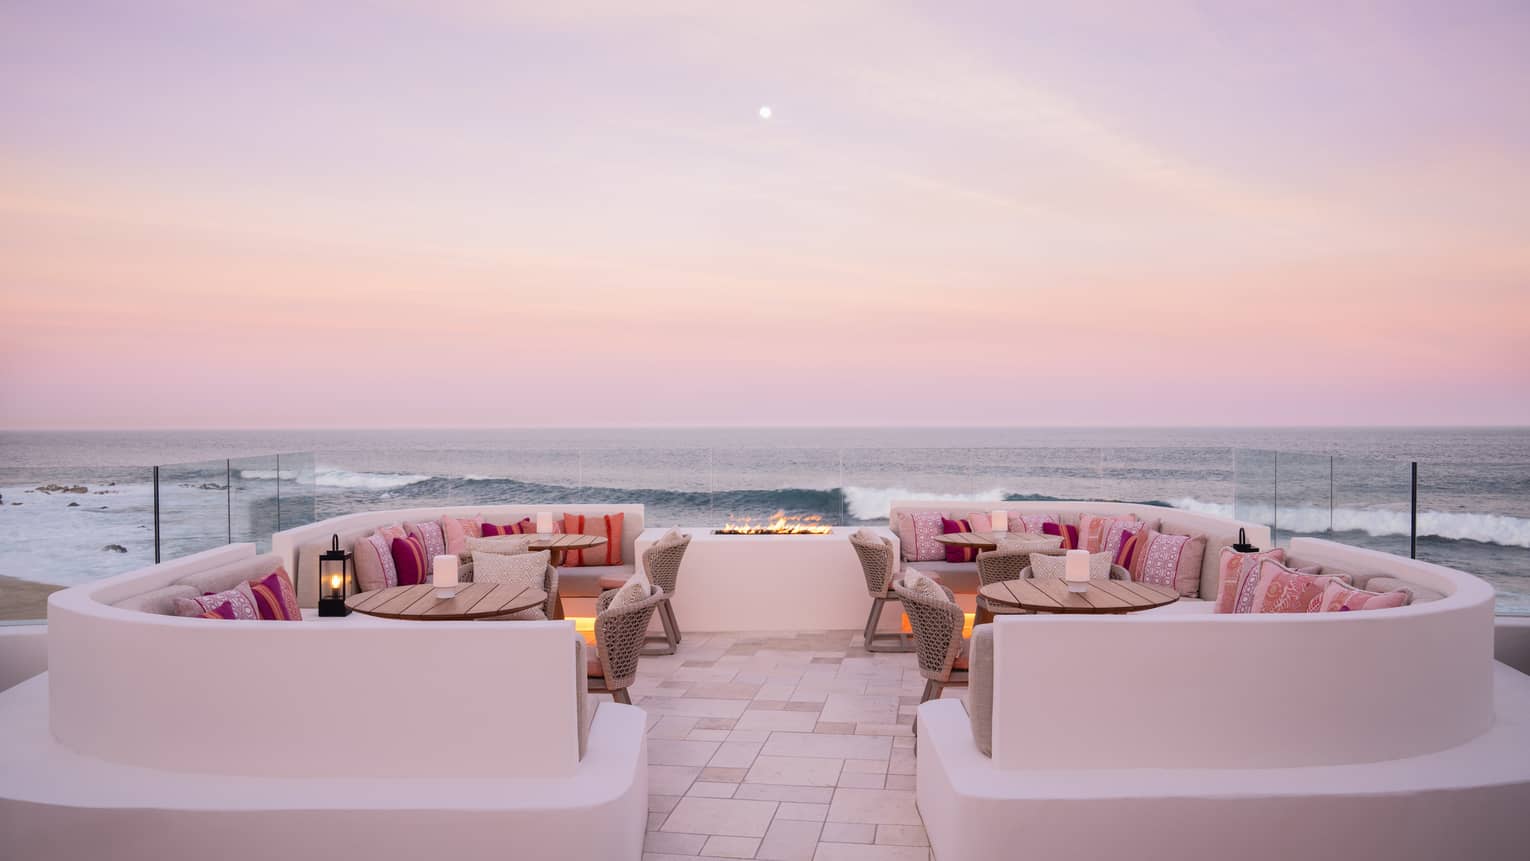 Chic rooftop bar with ocean view at dusk at Four Seasons Resort and Residences Cabo San Lucas